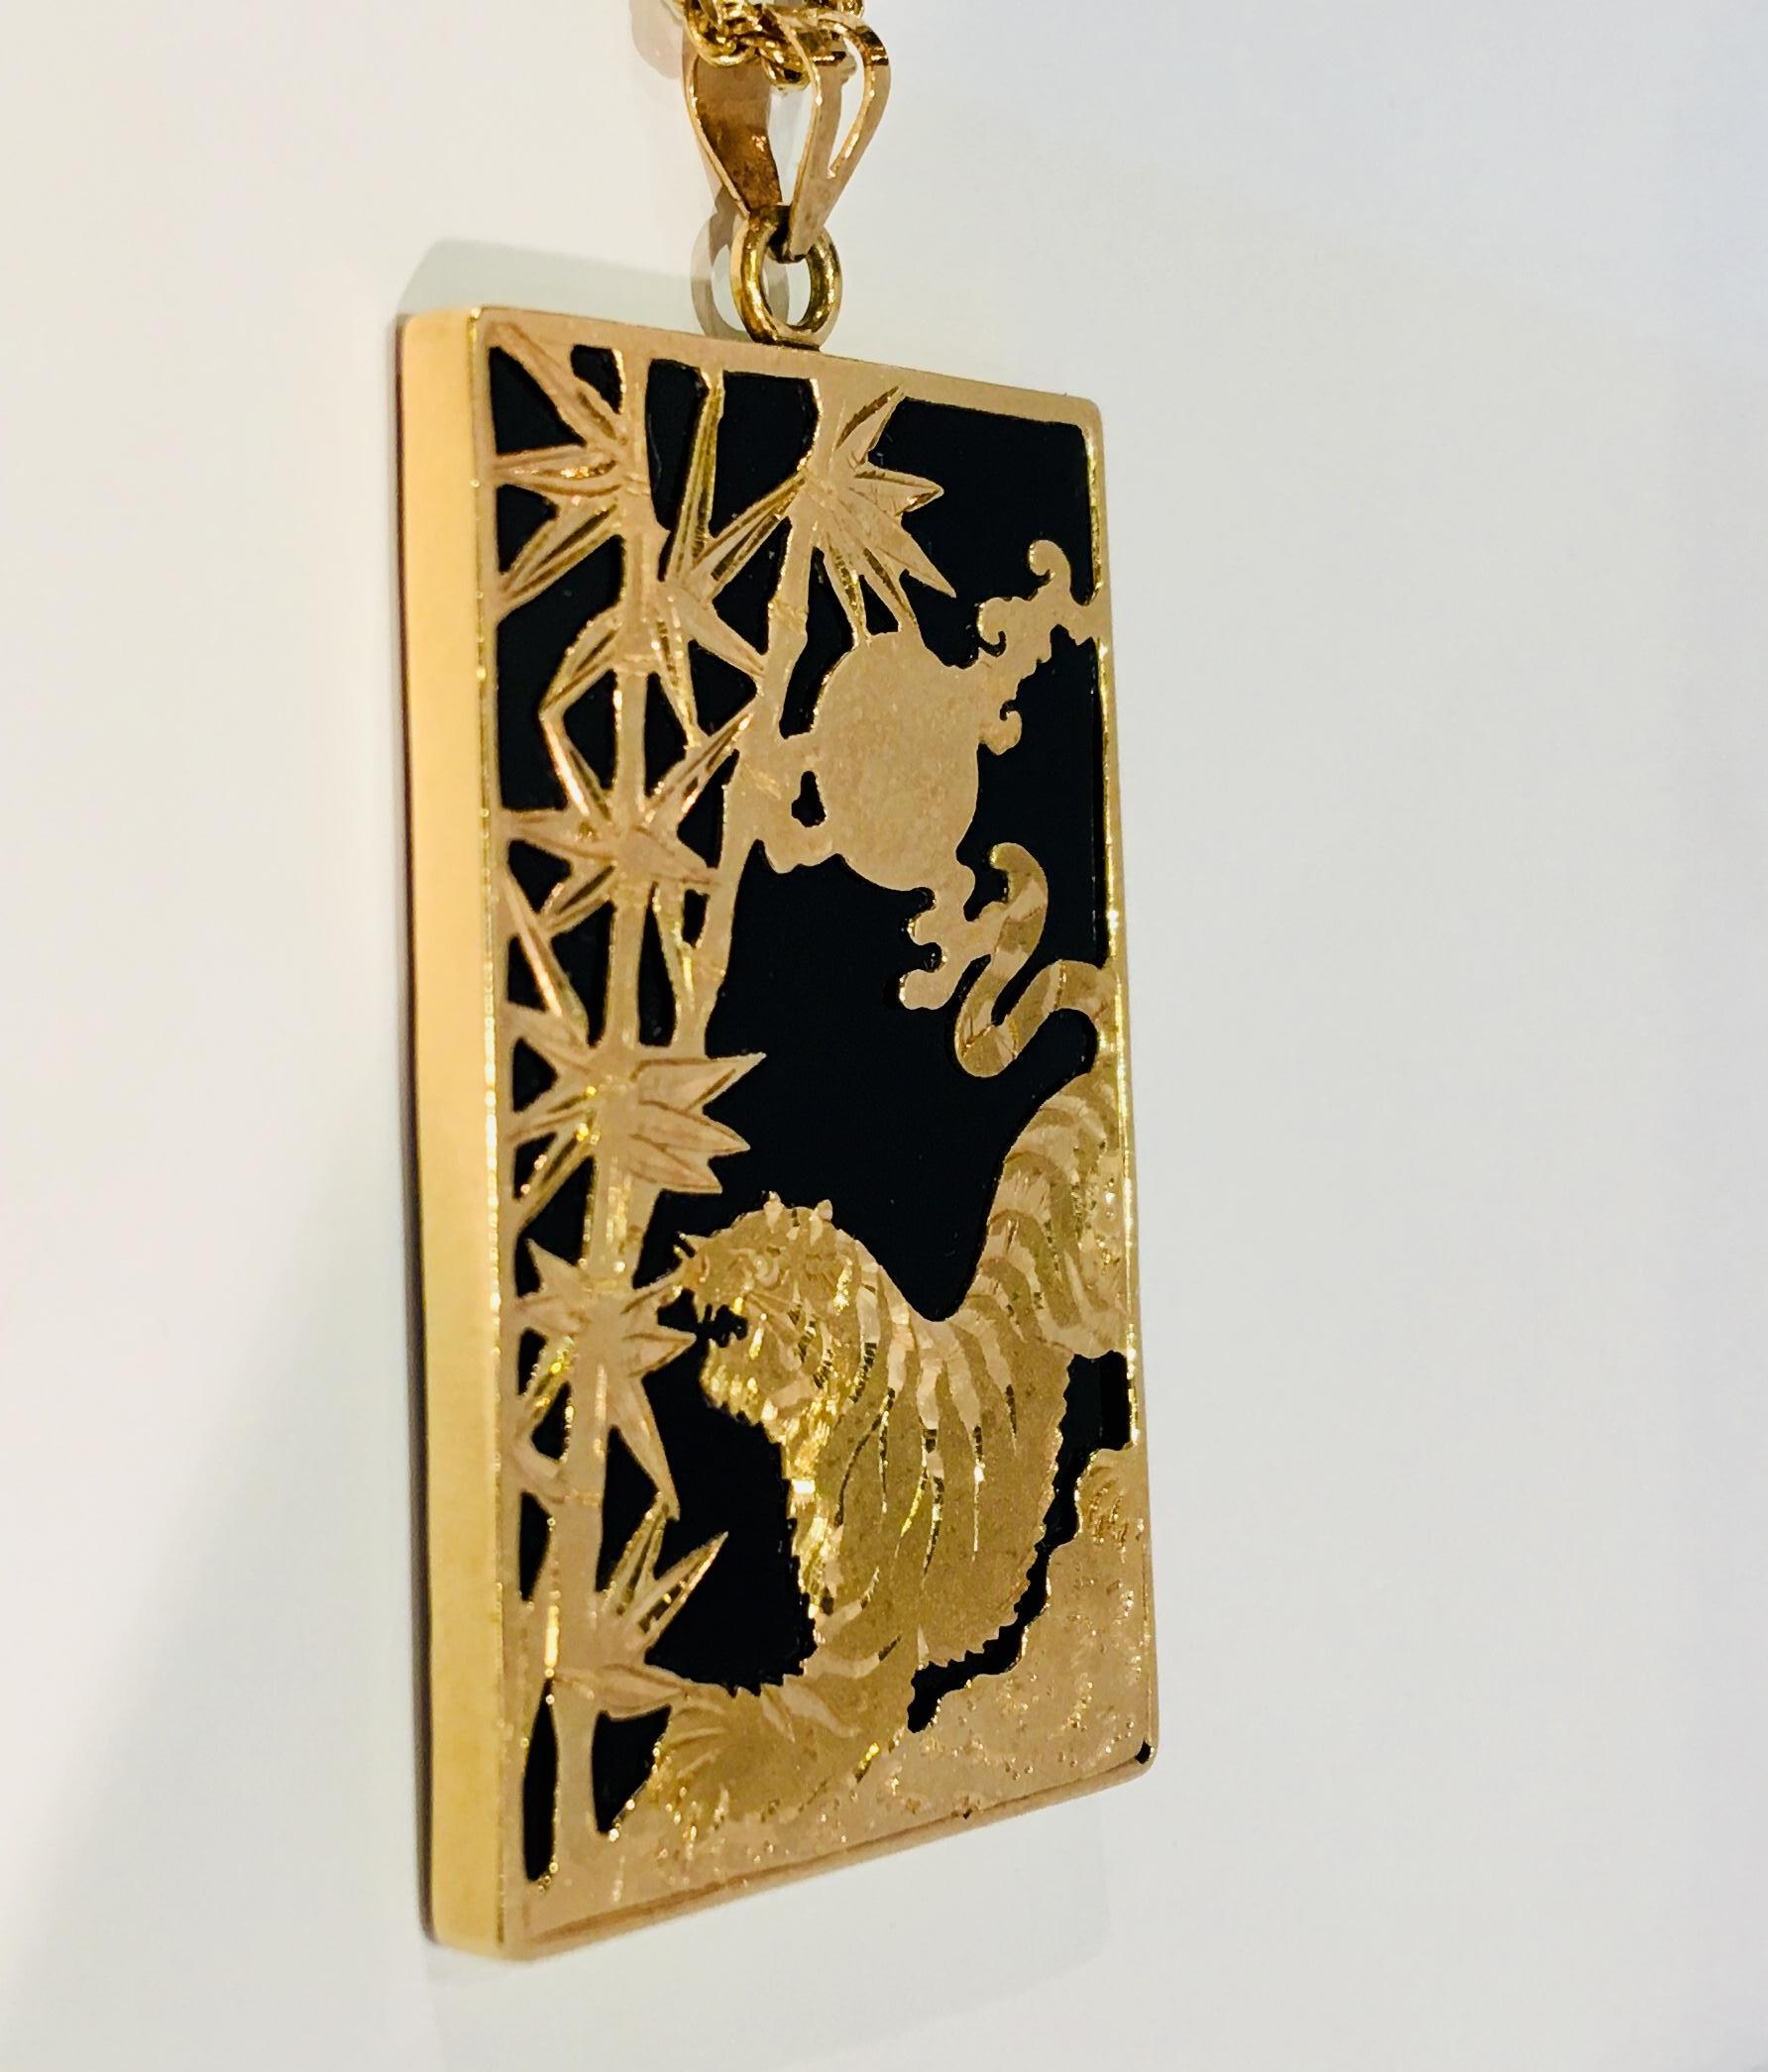 Large rectangular black onyx estate pendant is bezel set in 14 karat yellow gold and depicts an Asian-inspired scene of an open mouthed tiger facing two bamboo stalks by the light of a full moon.  

Associated with the moon and the lunar cycle in